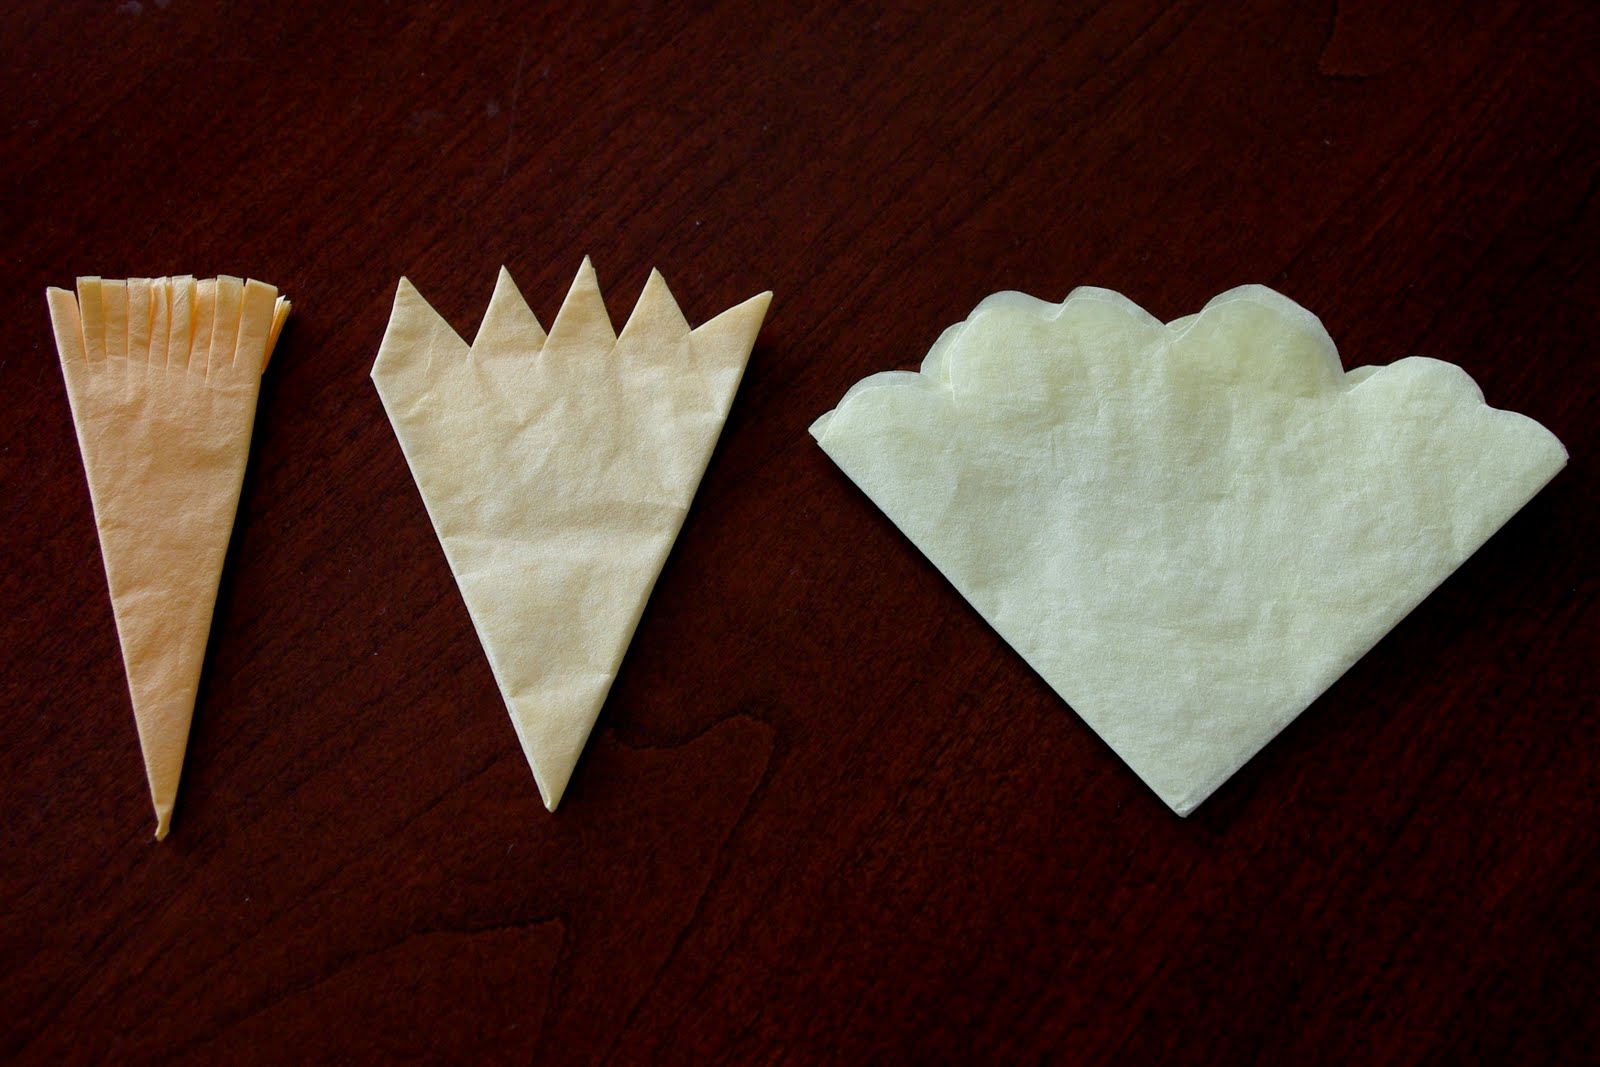 coffee filters folded and cut into various shapes and patterns